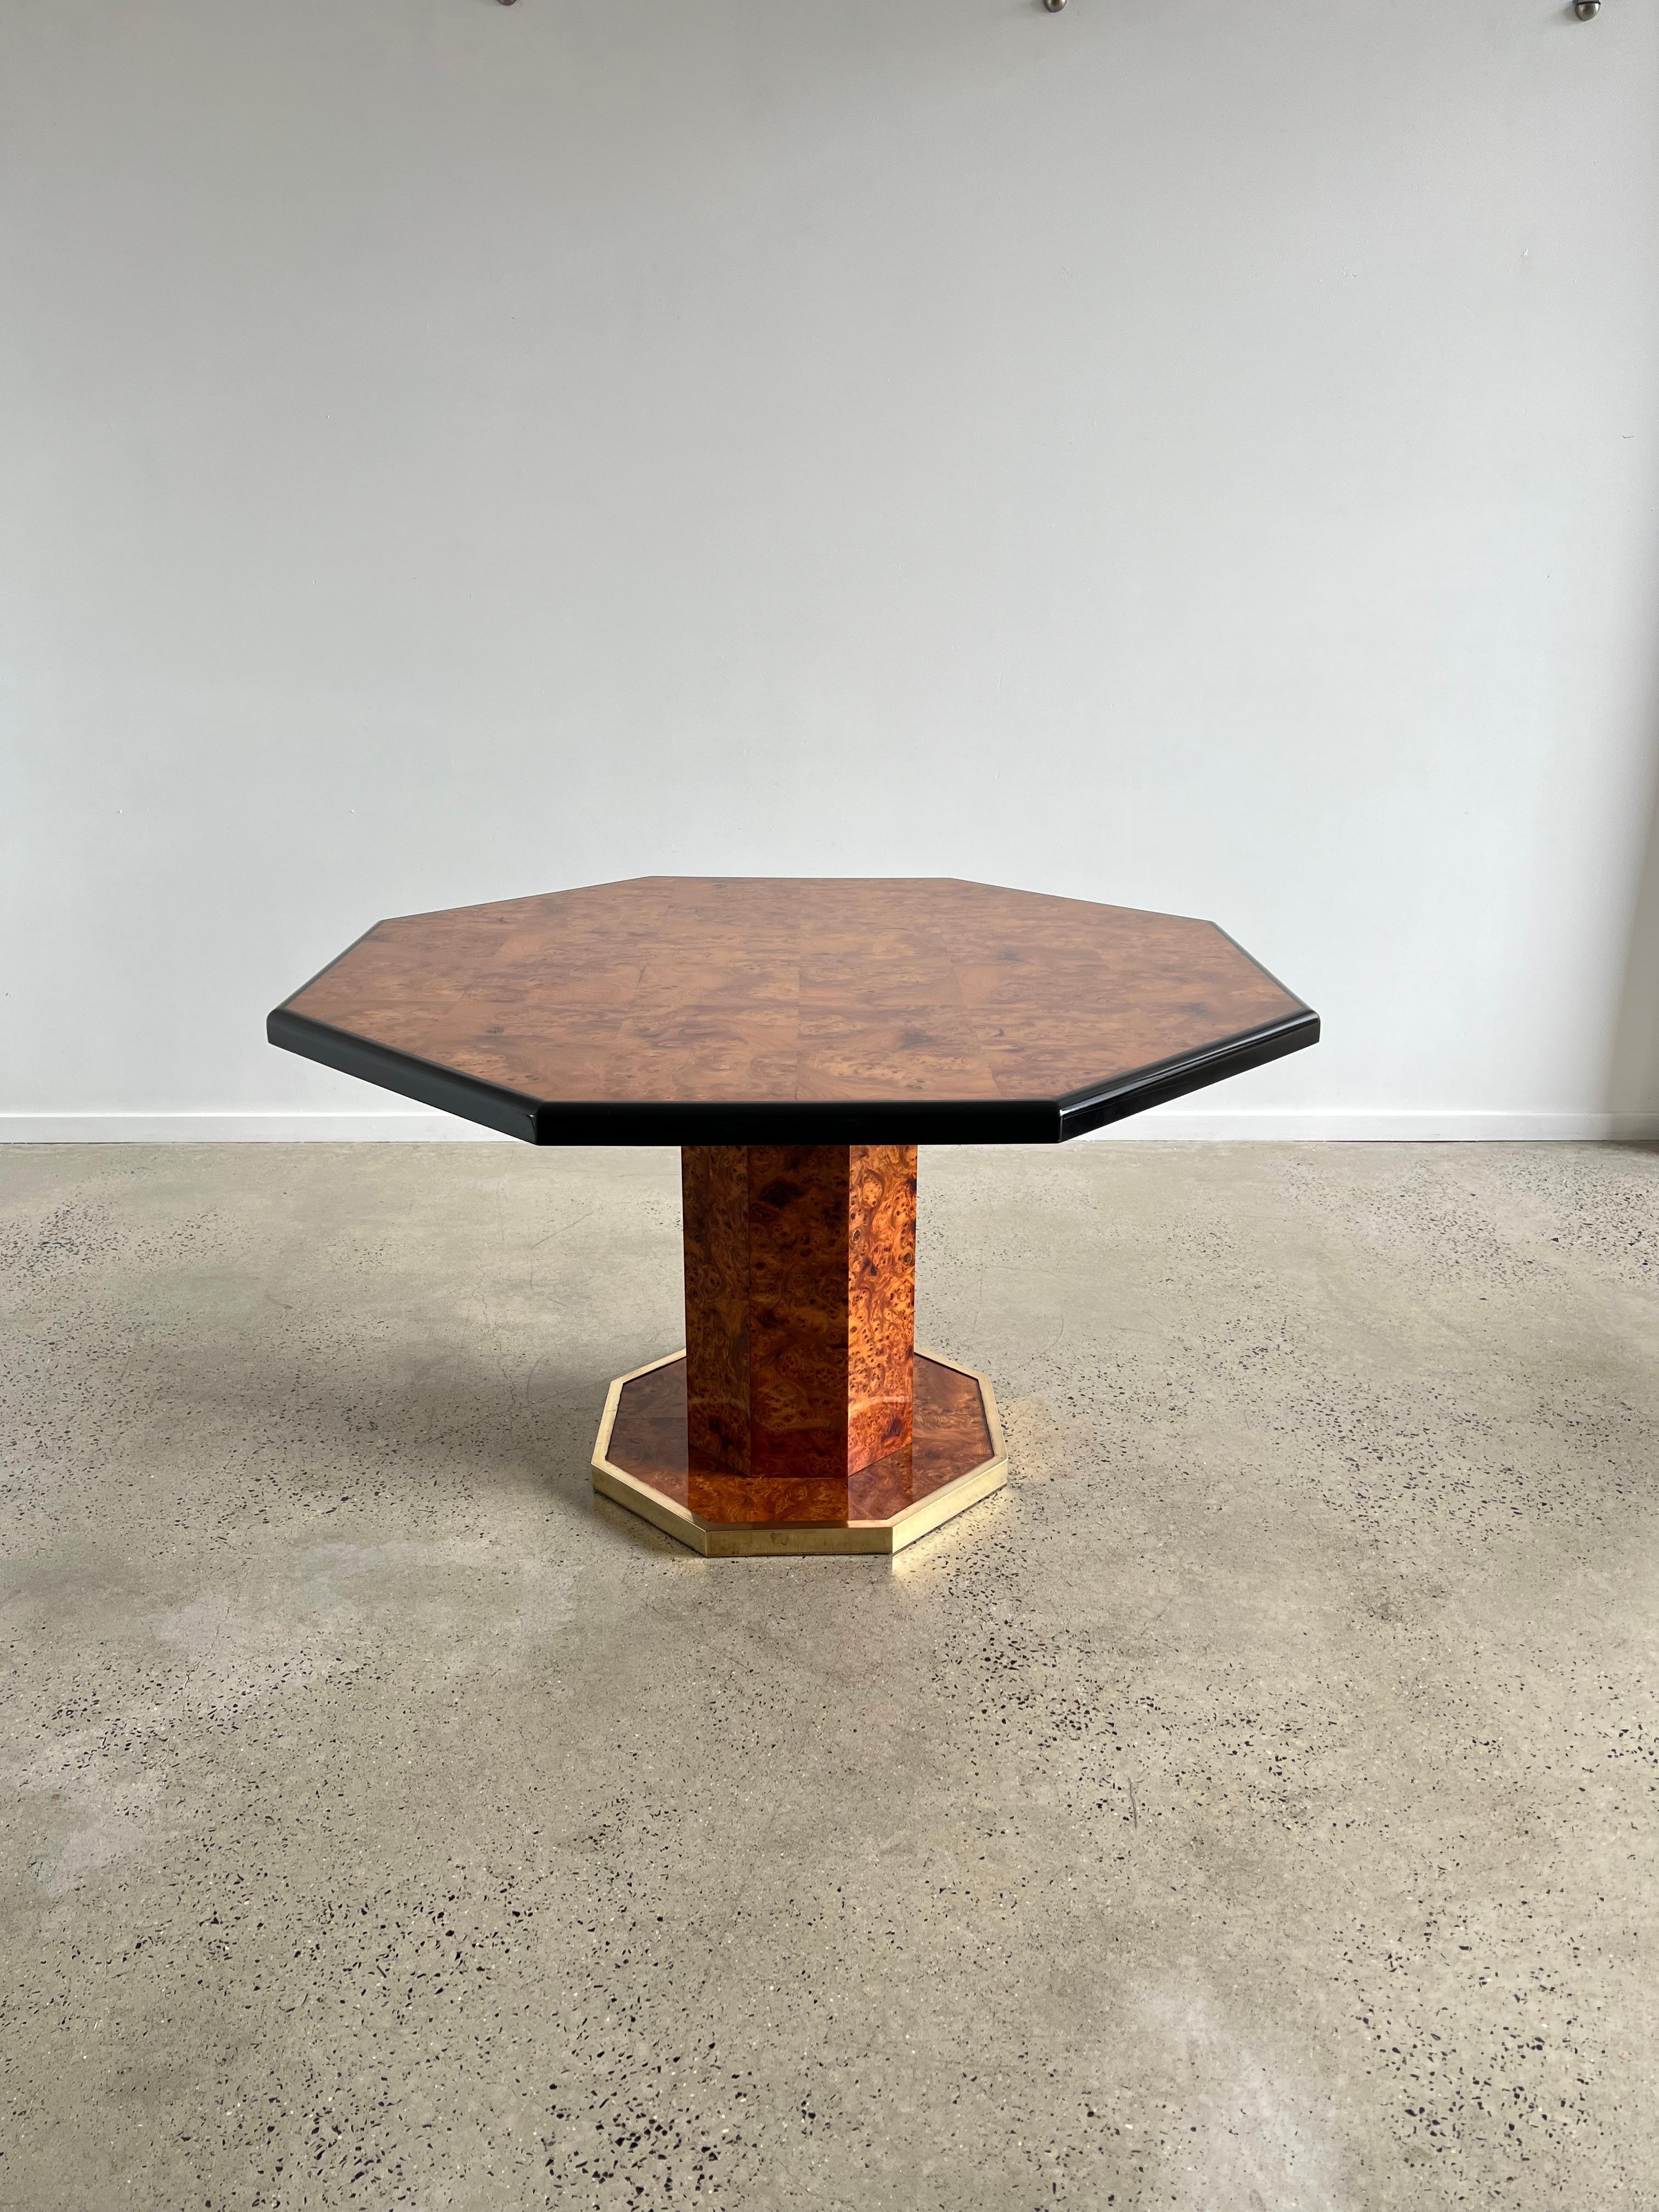 Stunning dining octagonal pedestal dining table by Willy Rizzo for Mario Sabot.